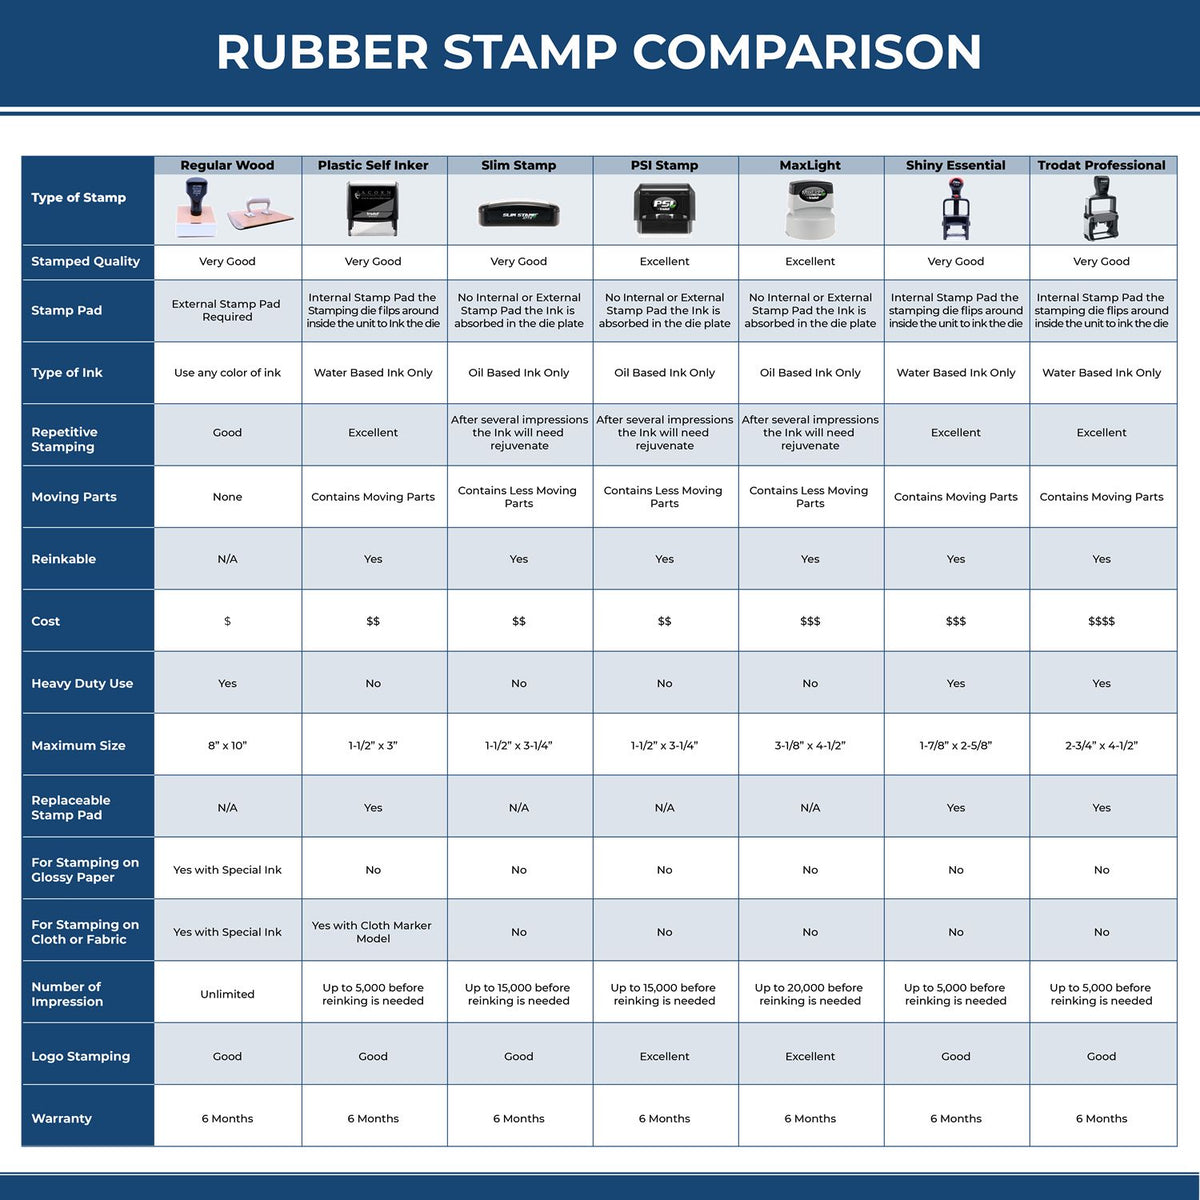 A comparison chart for the different types of mount models available for the Wooden Handle Massachusetts State Seal Notary Public Stamp.